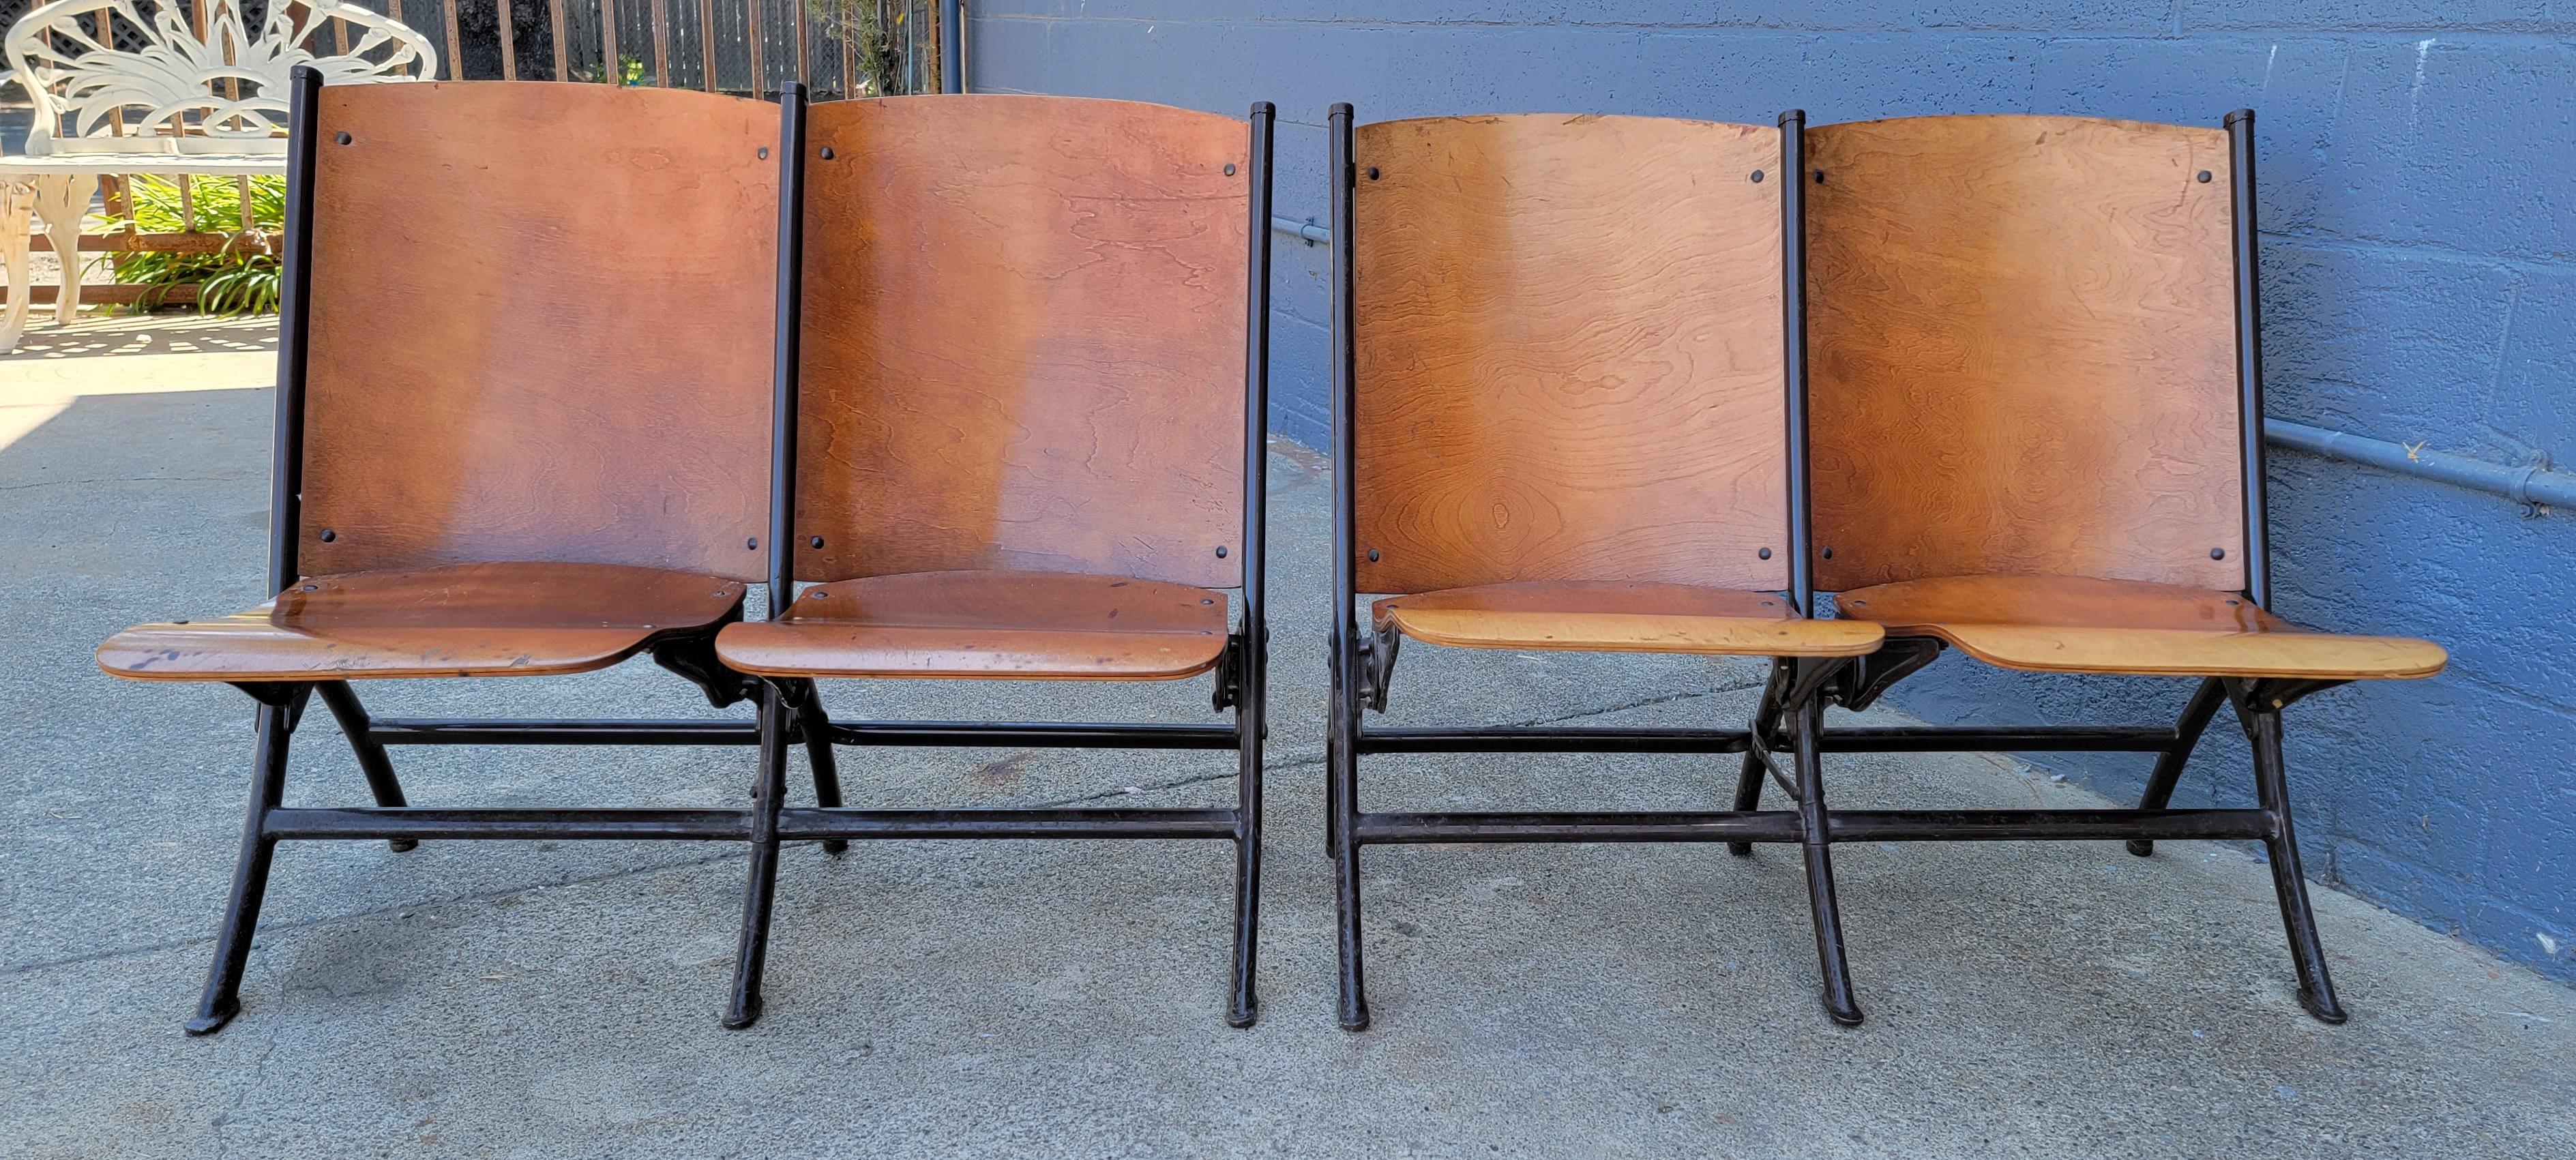 American Industrial Folding Theater / Auditorium Chairs, 1930's